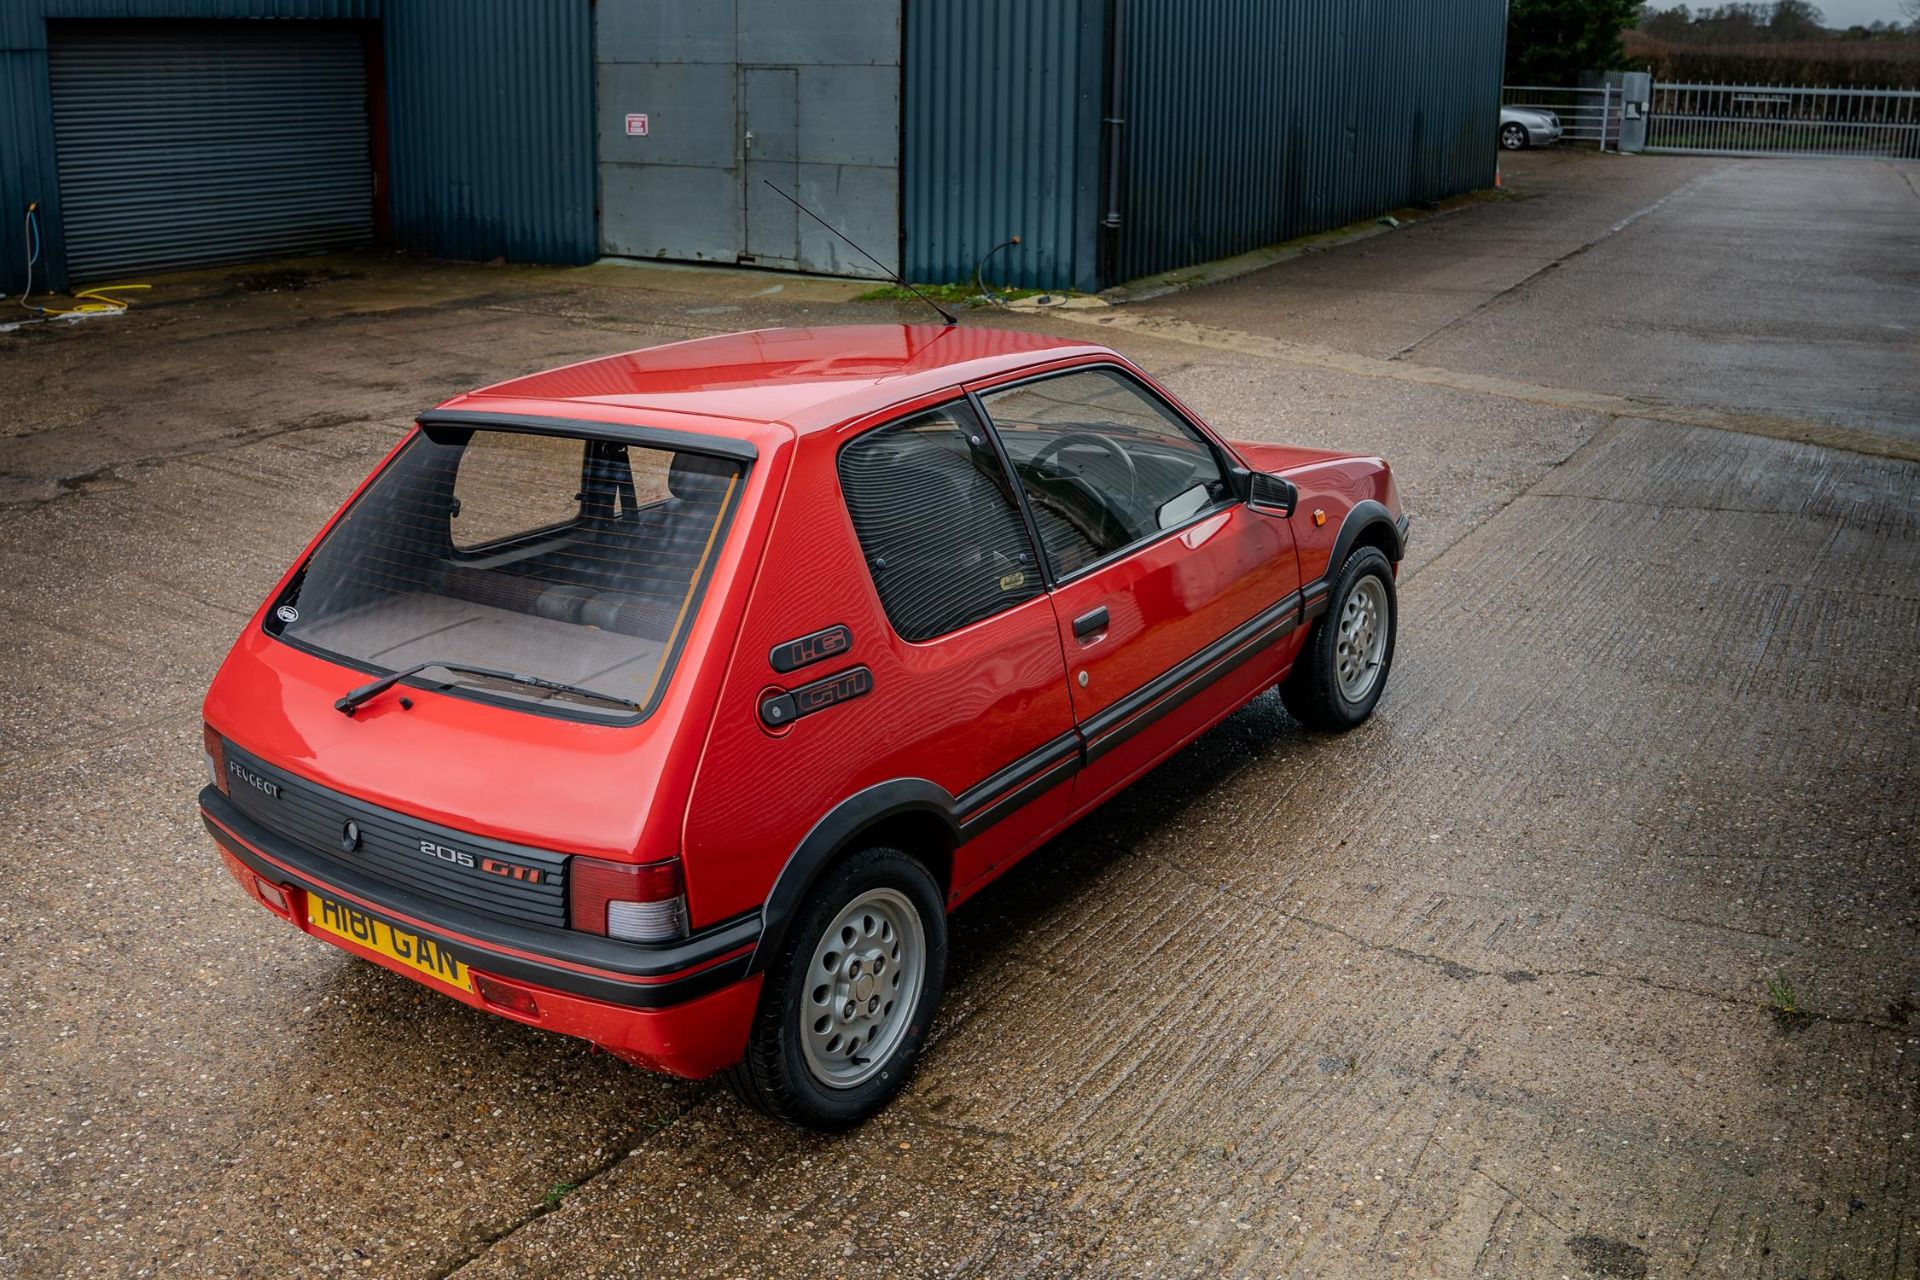 1990 Peugeot 205 GTi 1.6 (Phase 2) - Image 4 of 10